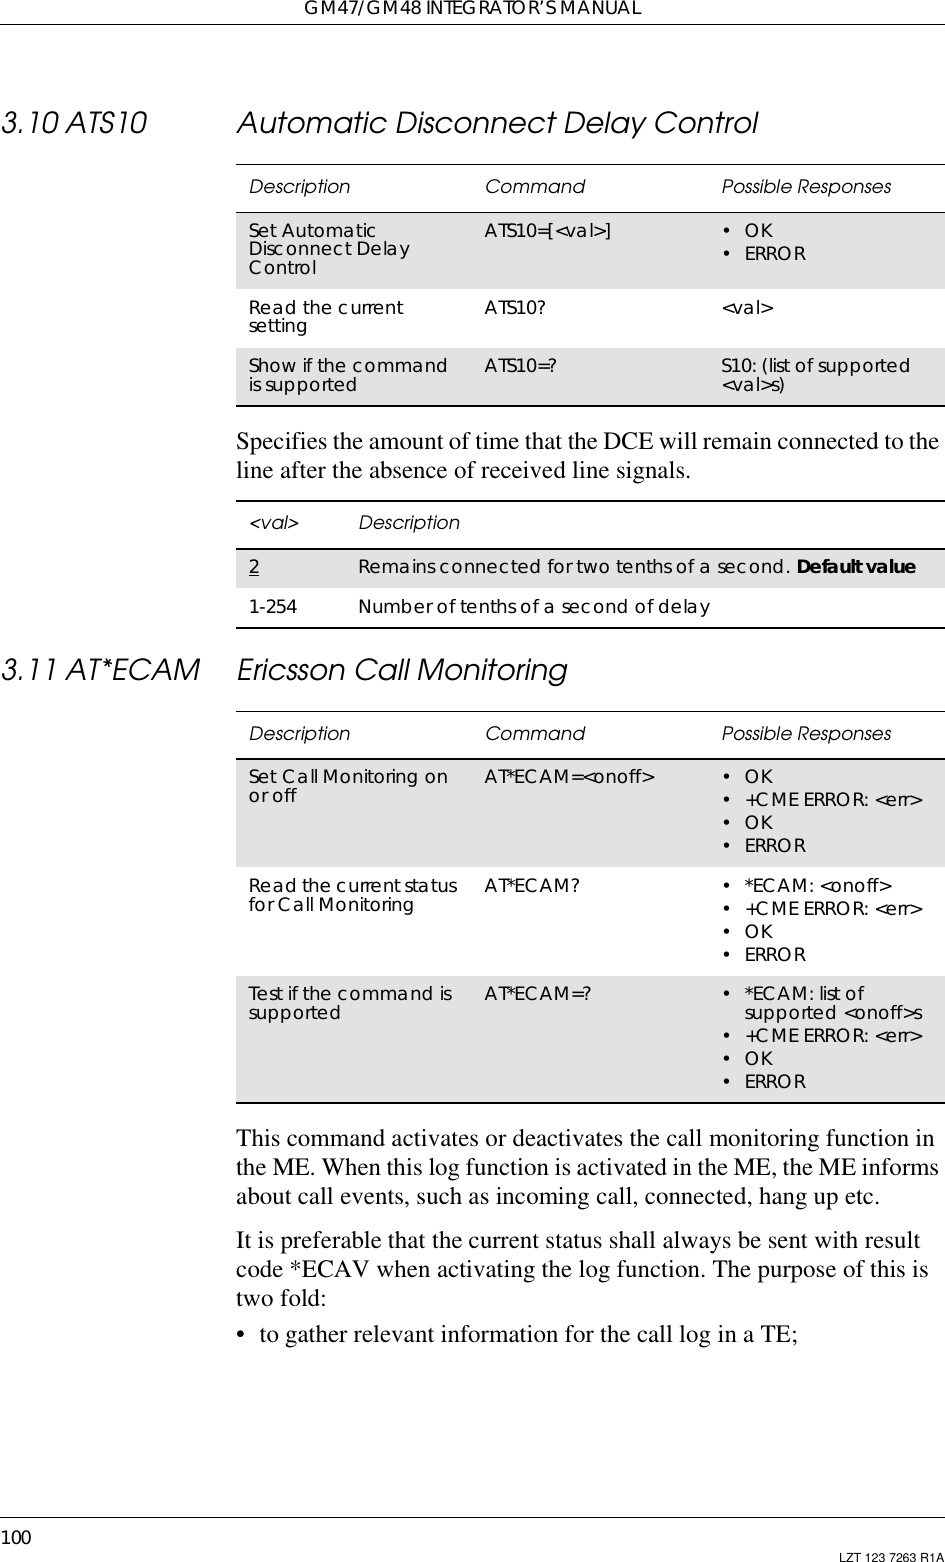 GM47/GM48 INTEGRATOR’S MANUAL100 LZT 123 7263 R1A3.10 ATS10 Automatic Disconnect Delay ControlSpecifies the amount of time that the DCE will remain connected to theline after the absence of received line signals.3.11 AT*ECAM Ericsson Call MonitoringThis command activates or deactivates the call monitoring function inthe ME. When this log function is activated in the ME, the ME informsabout call events, such as incoming call, connected, hang up etc.It is preferable that the current status shall always be sent with resultcode *ECAV when activating the log function. The purpose of this istwo fold:• to gather relevant information for the call log in a TE;Description Command Possible ResponsesSet AutomaticDisconnect DelayControlATS10=[&lt;val&gt;] •OK•ERRORRead the currentsetting ATS10? &lt;val&gt;Show if the commandis supported ATS10=? S10: (list of supported&lt;val&gt;s)&lt;val&gt; Description2Remains connected for two tenths of a second. Default value1-254 Number of tenths of a second of delayDescription Command Possible ResponsesSet Call Monitoring onor off AT*ECAM=&lt;onoff&gt; •OK•+CMEERROR:&lt;err&gt;•OK•ERRORRead the current statusfor Call Monitoring AT*ECAM? •*ECAM:&lt;onoff&gt;•+CMEERROR:&lt;err&gt;•OK•ERRORTest if the command issupported AT*ECAM=? •*ECAM:listofsupported &lt;onoff&gt;s•+CMEERROR:&lt;err&gt;•OK•ERROR